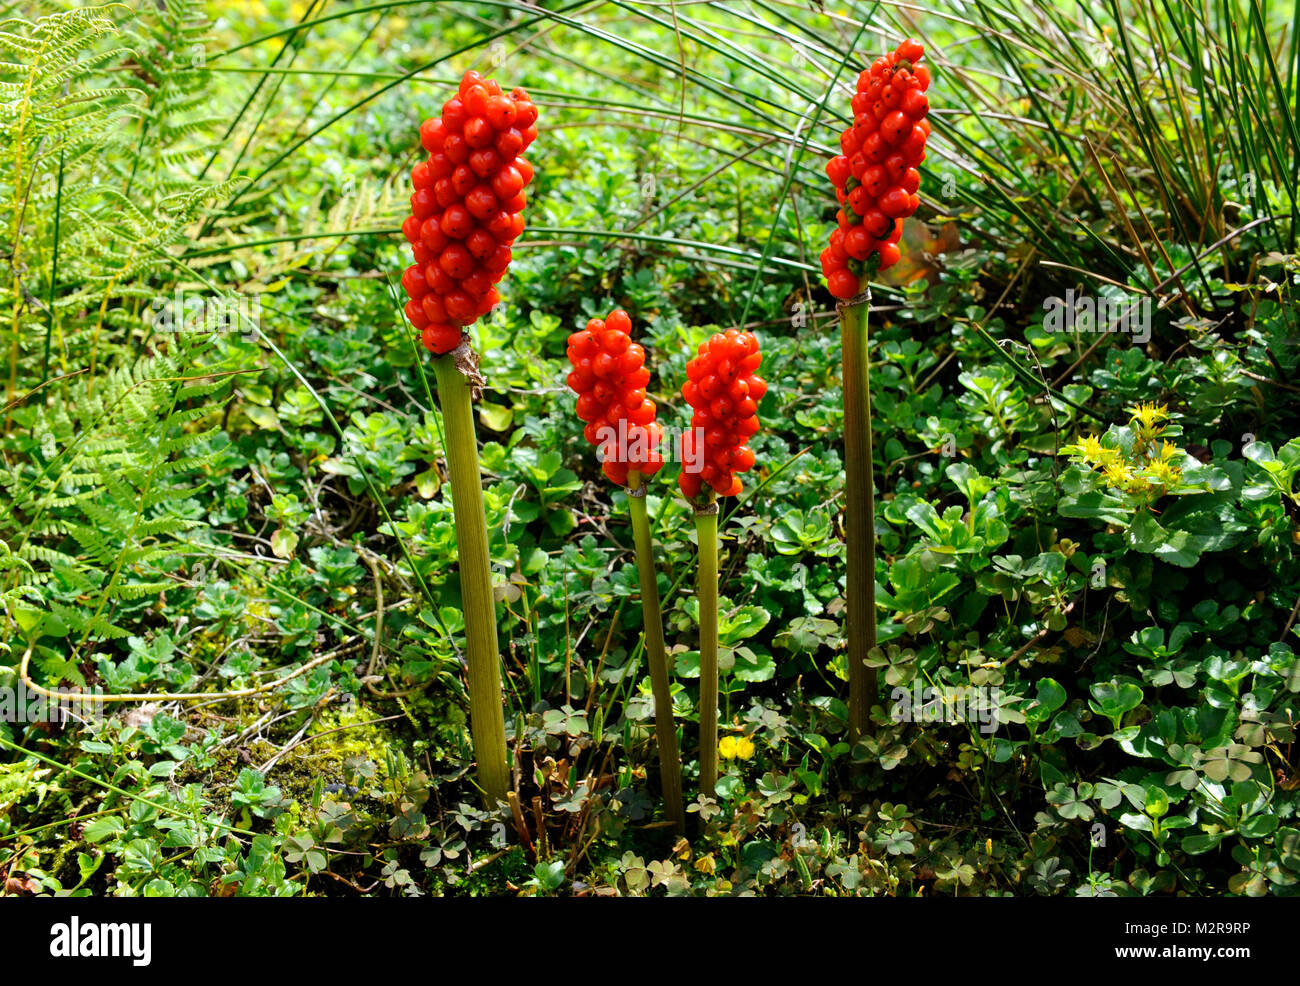 orange-red shine the poisonous multiple fruits of the Aaron's rod, Arum maculatum, which stands as a wild plant under protection of endangered species Stock Photo